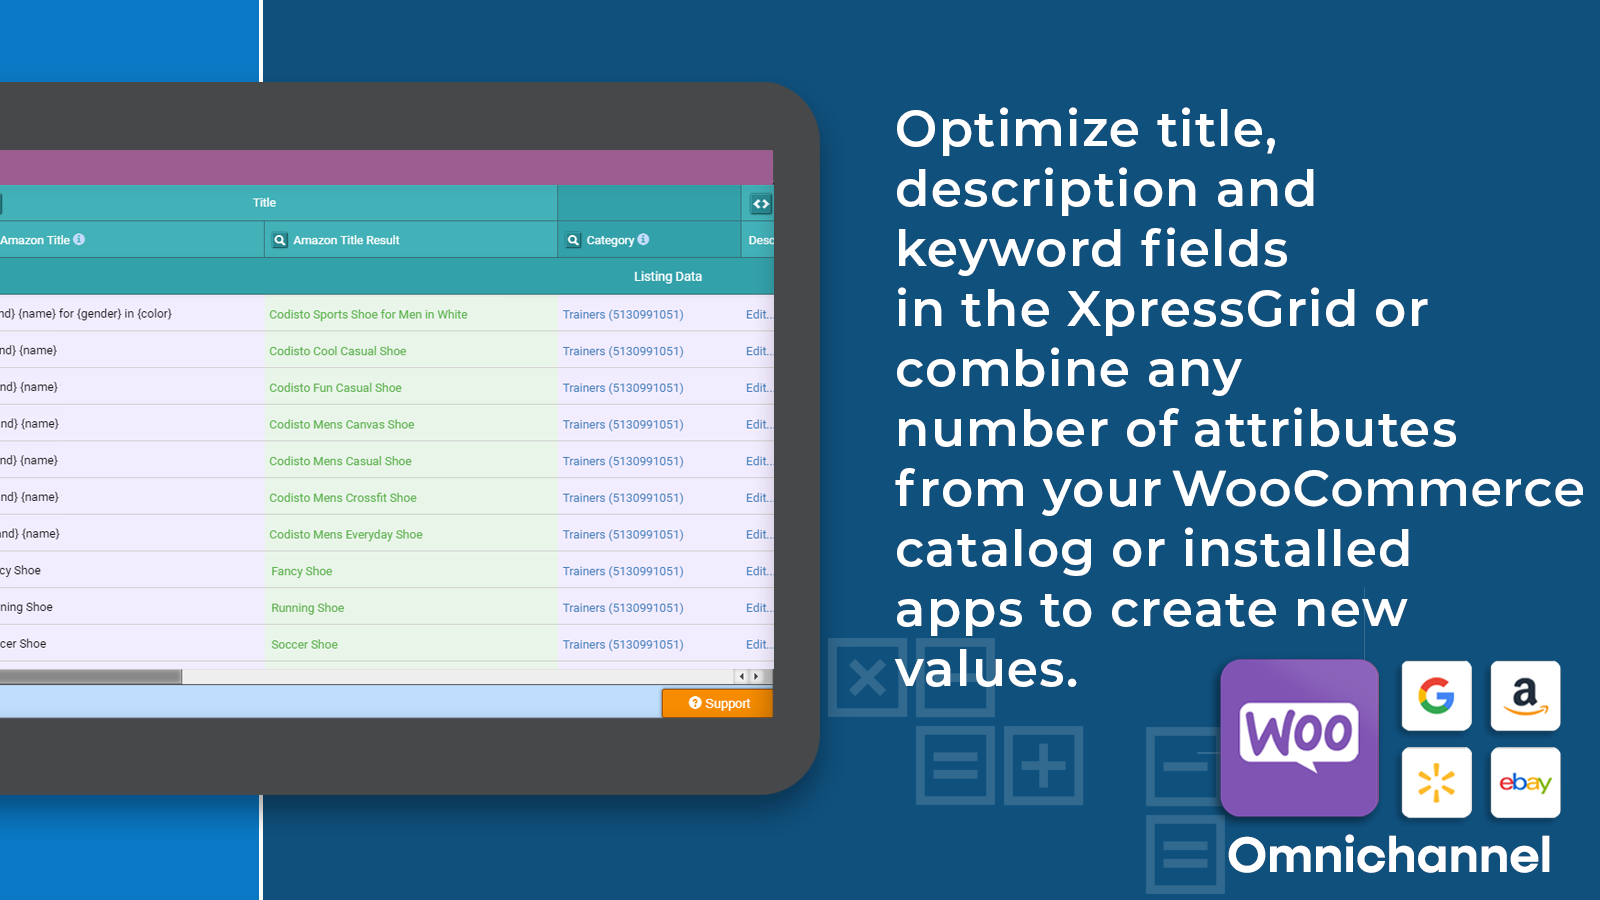 Optimize title, description and keyword fields in the XpressGrid